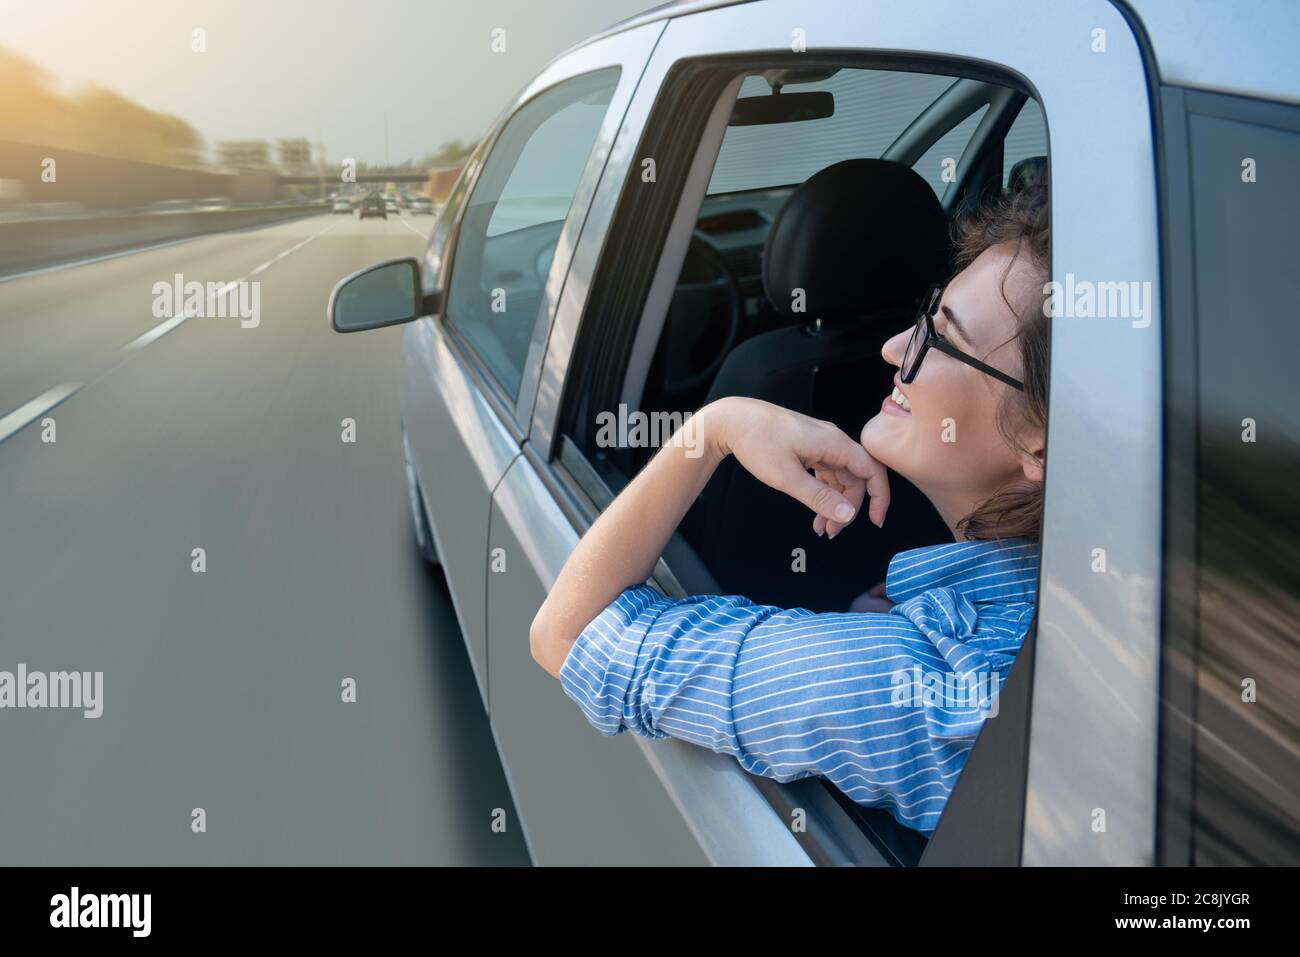 Woman passenger sitting in the backseat and looking out the window when her self-driving car rides on the highway. Stock Photo